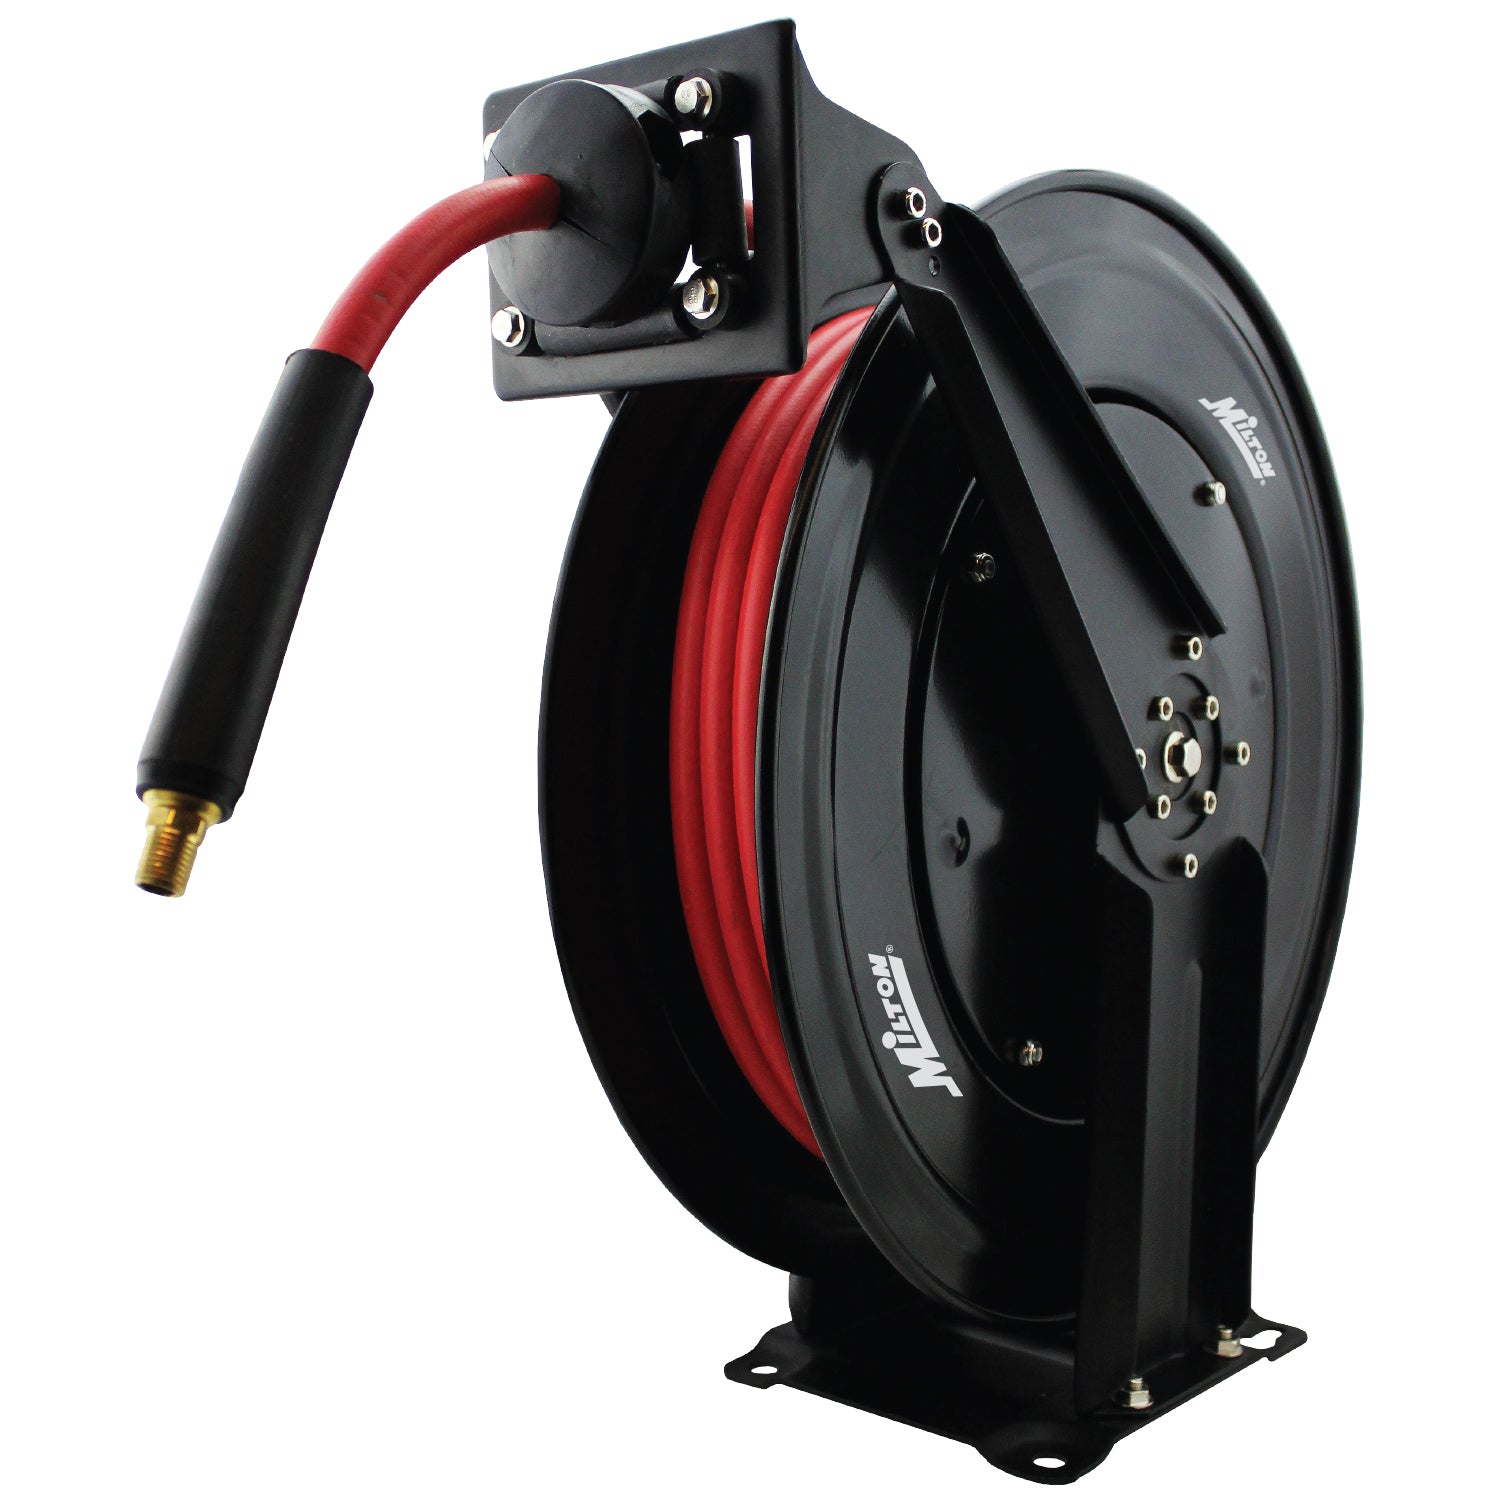 Hromee Retractable Air Hose Reel with 3/8 in. x 50 Ft Hybrid Air